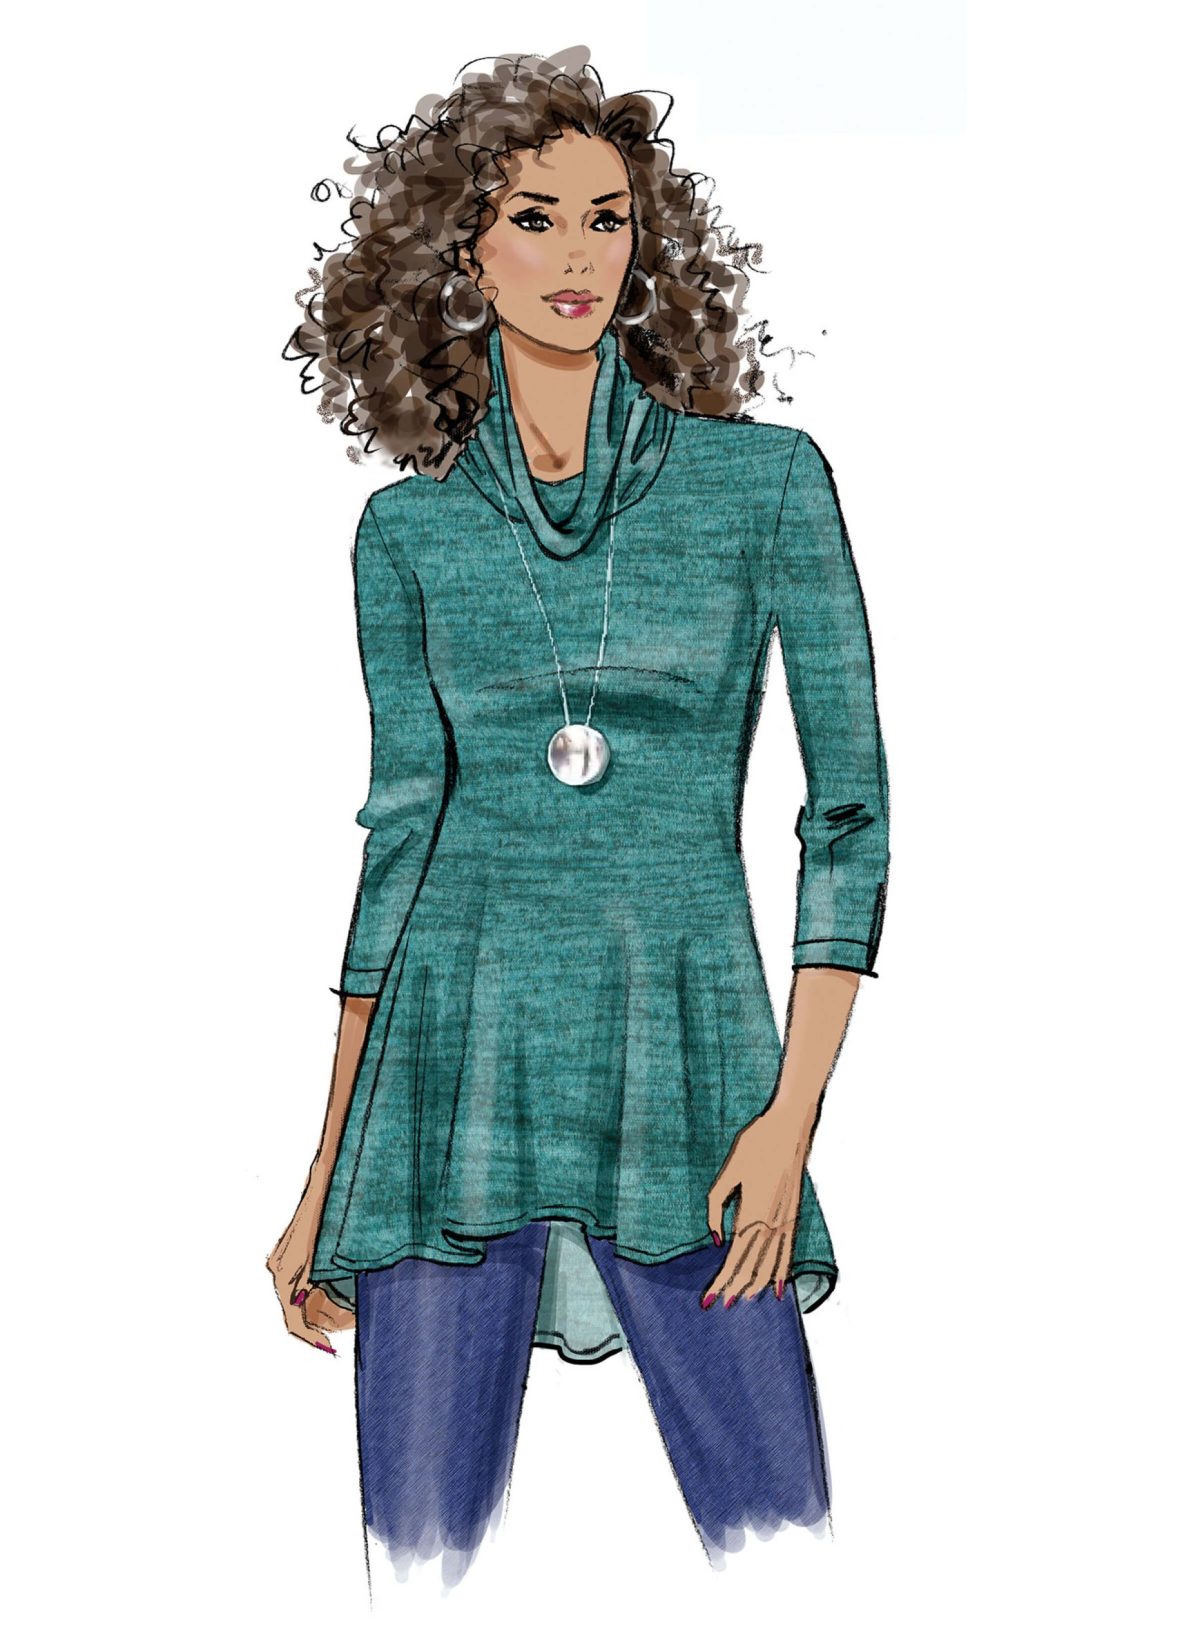 Butterick Sewing Pattern B6961 Misses' Knit Tops